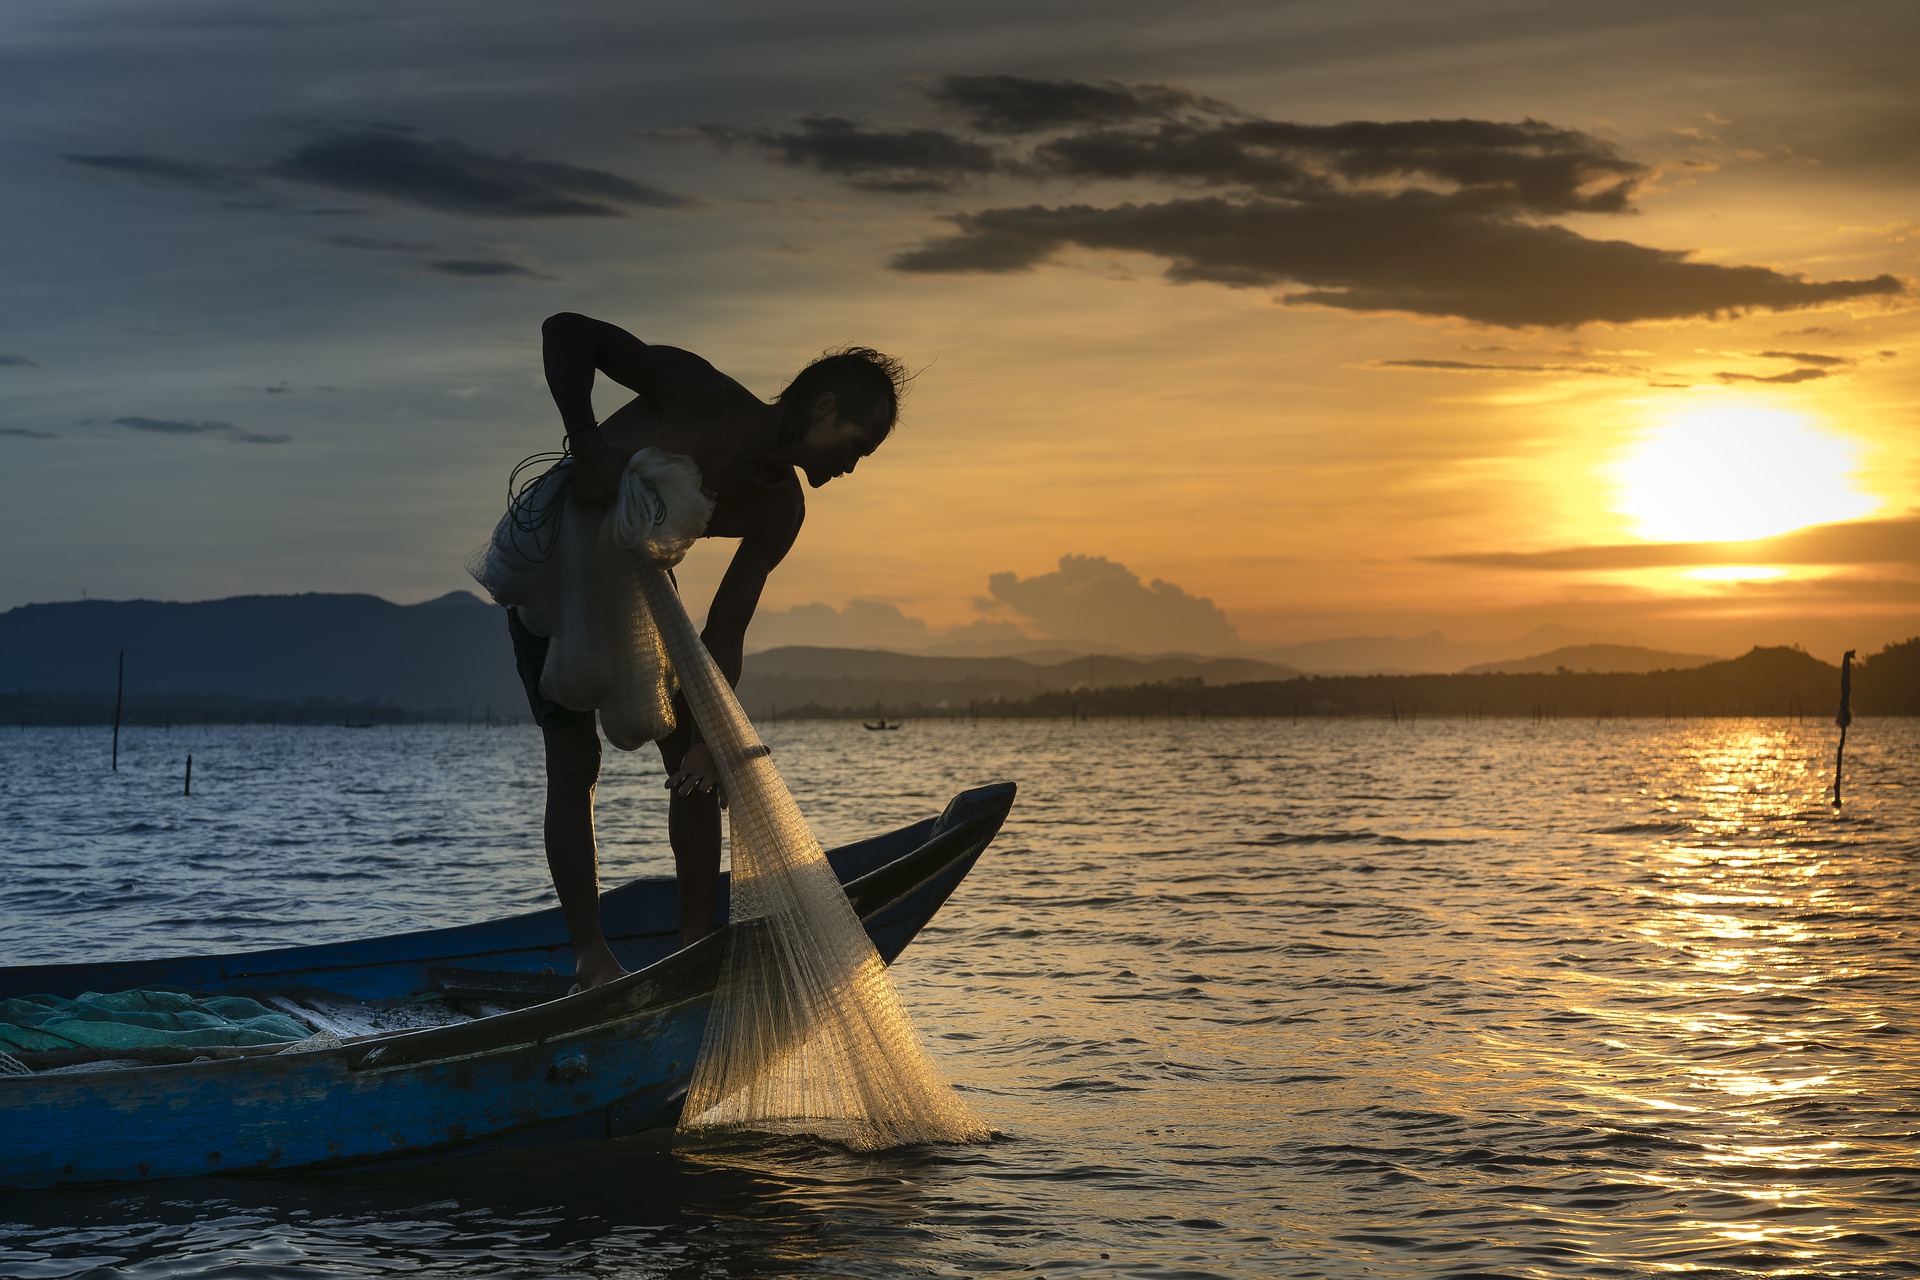 fish, fishers and fishermen: Image by Quang Nguyen vinh from Pixabay